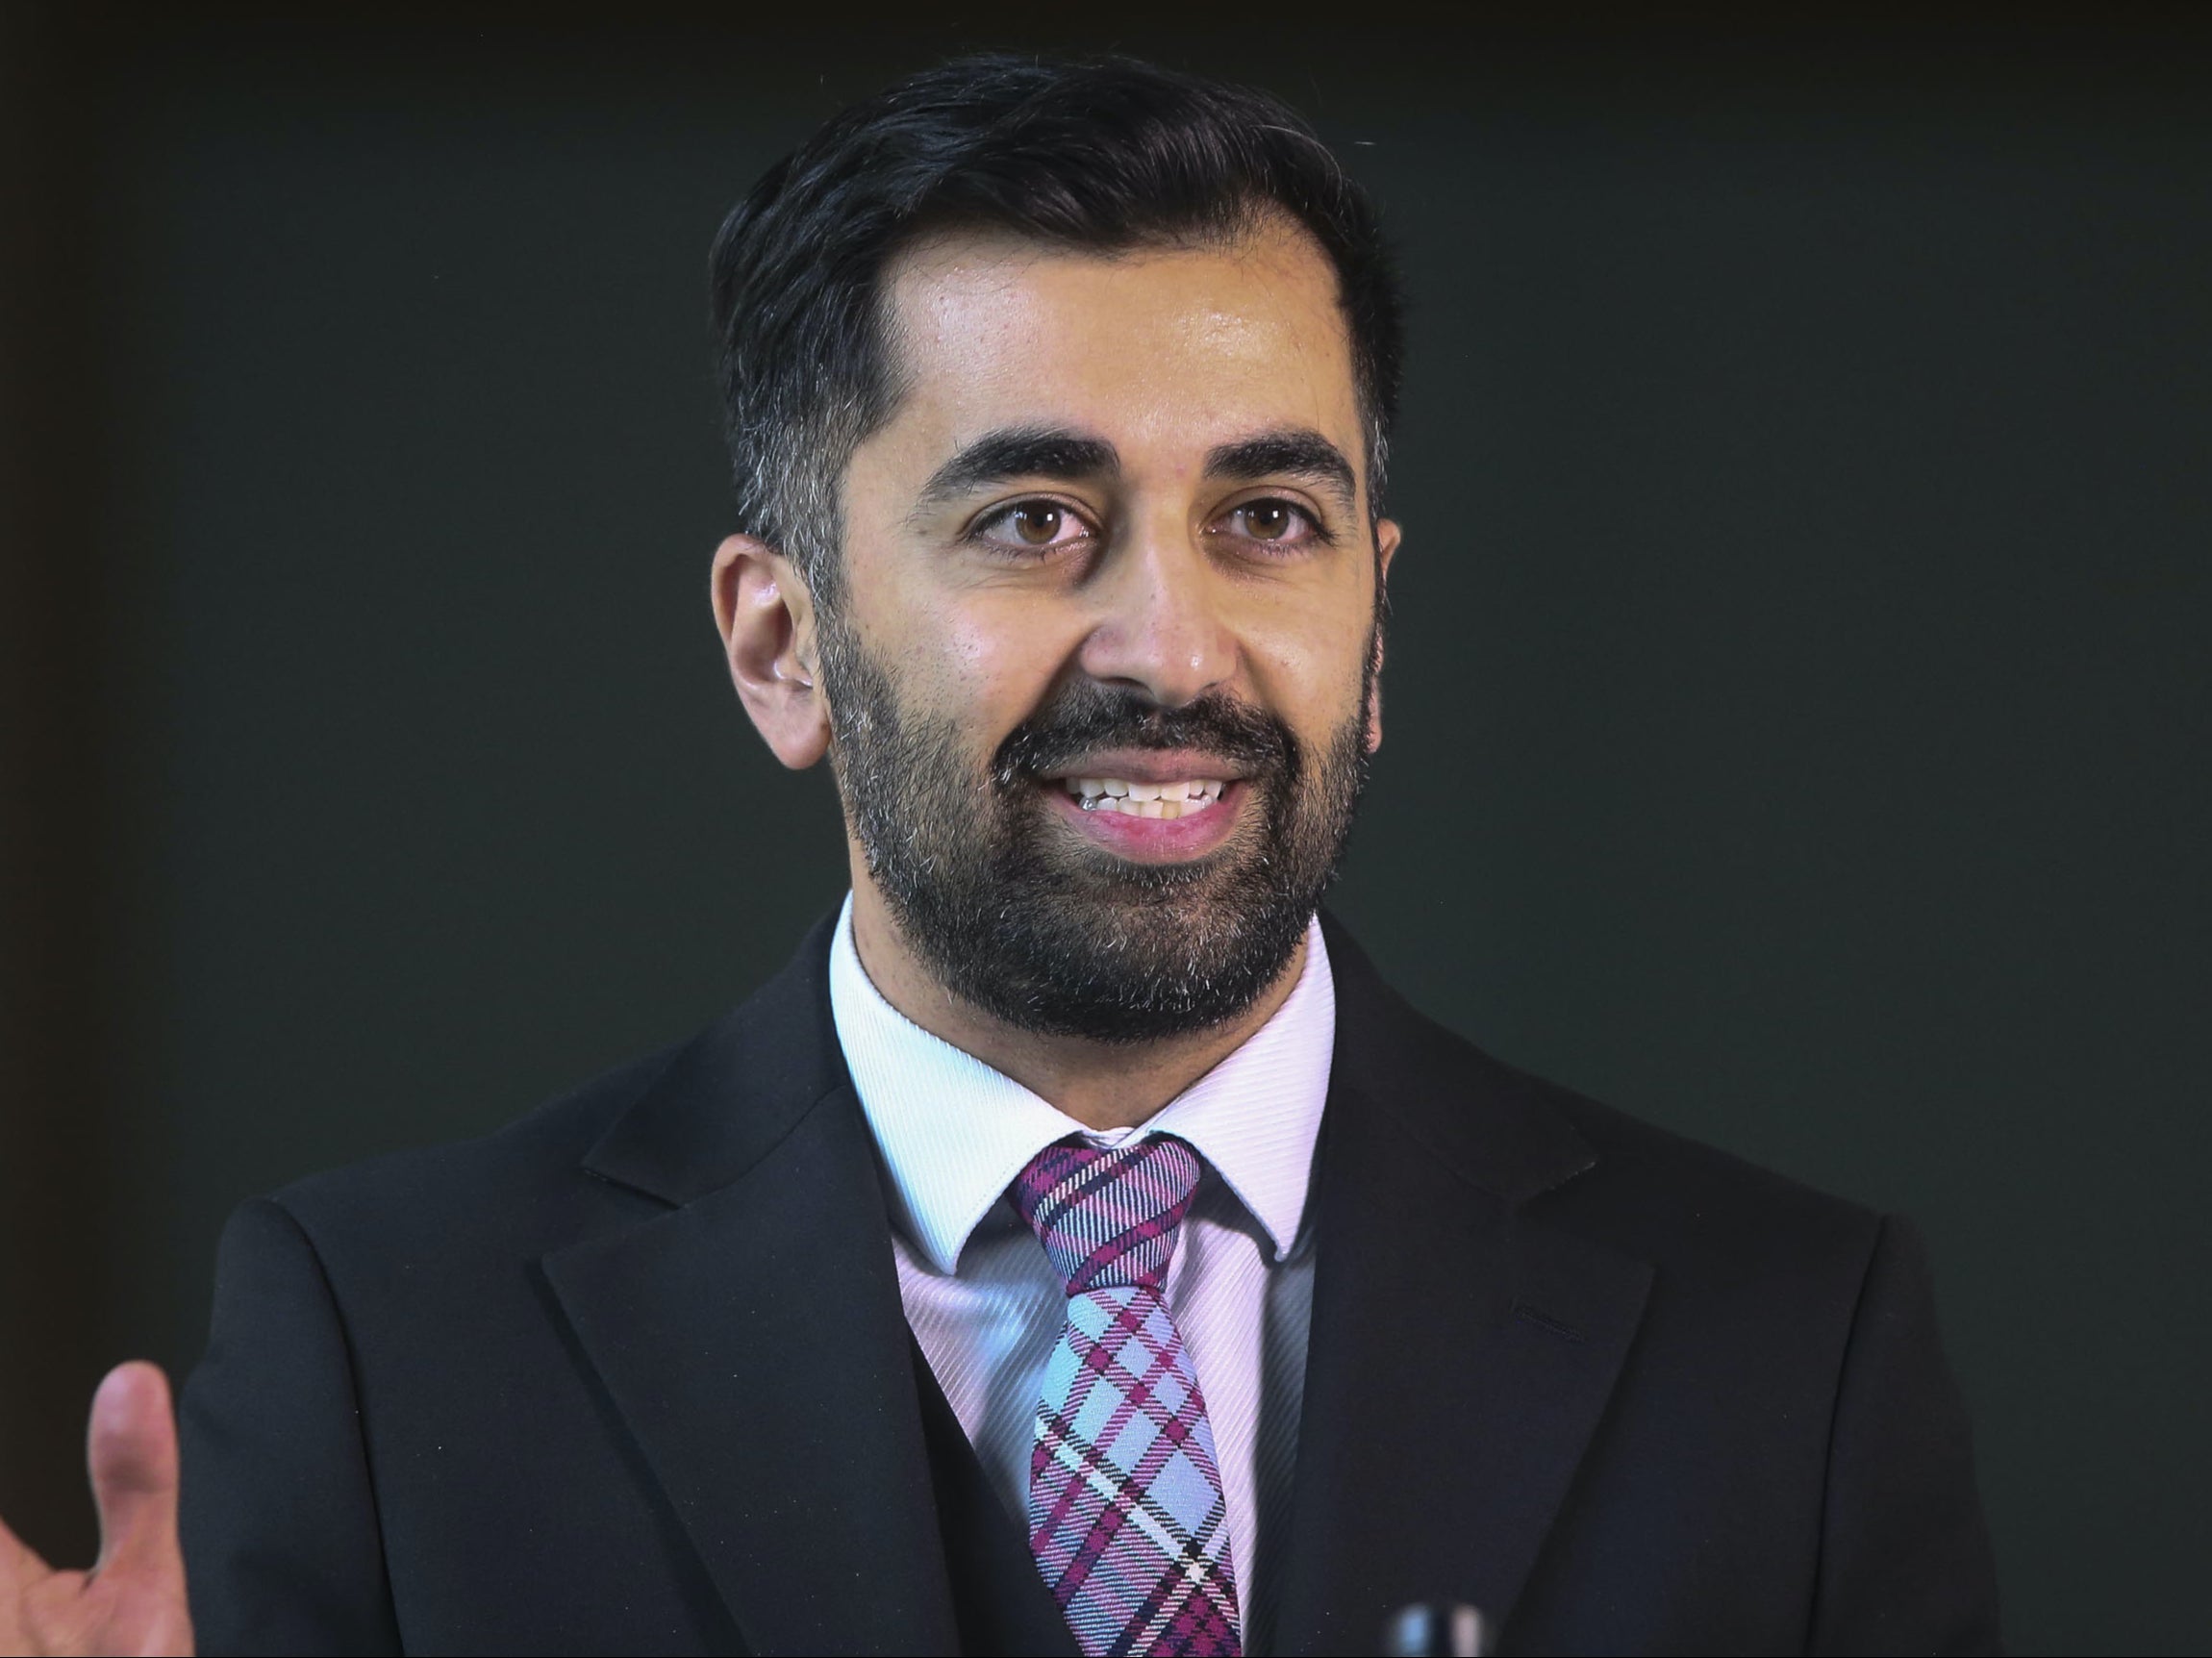 Scottish health secretary Humza Yousaf was filmed falling off his knee scooter